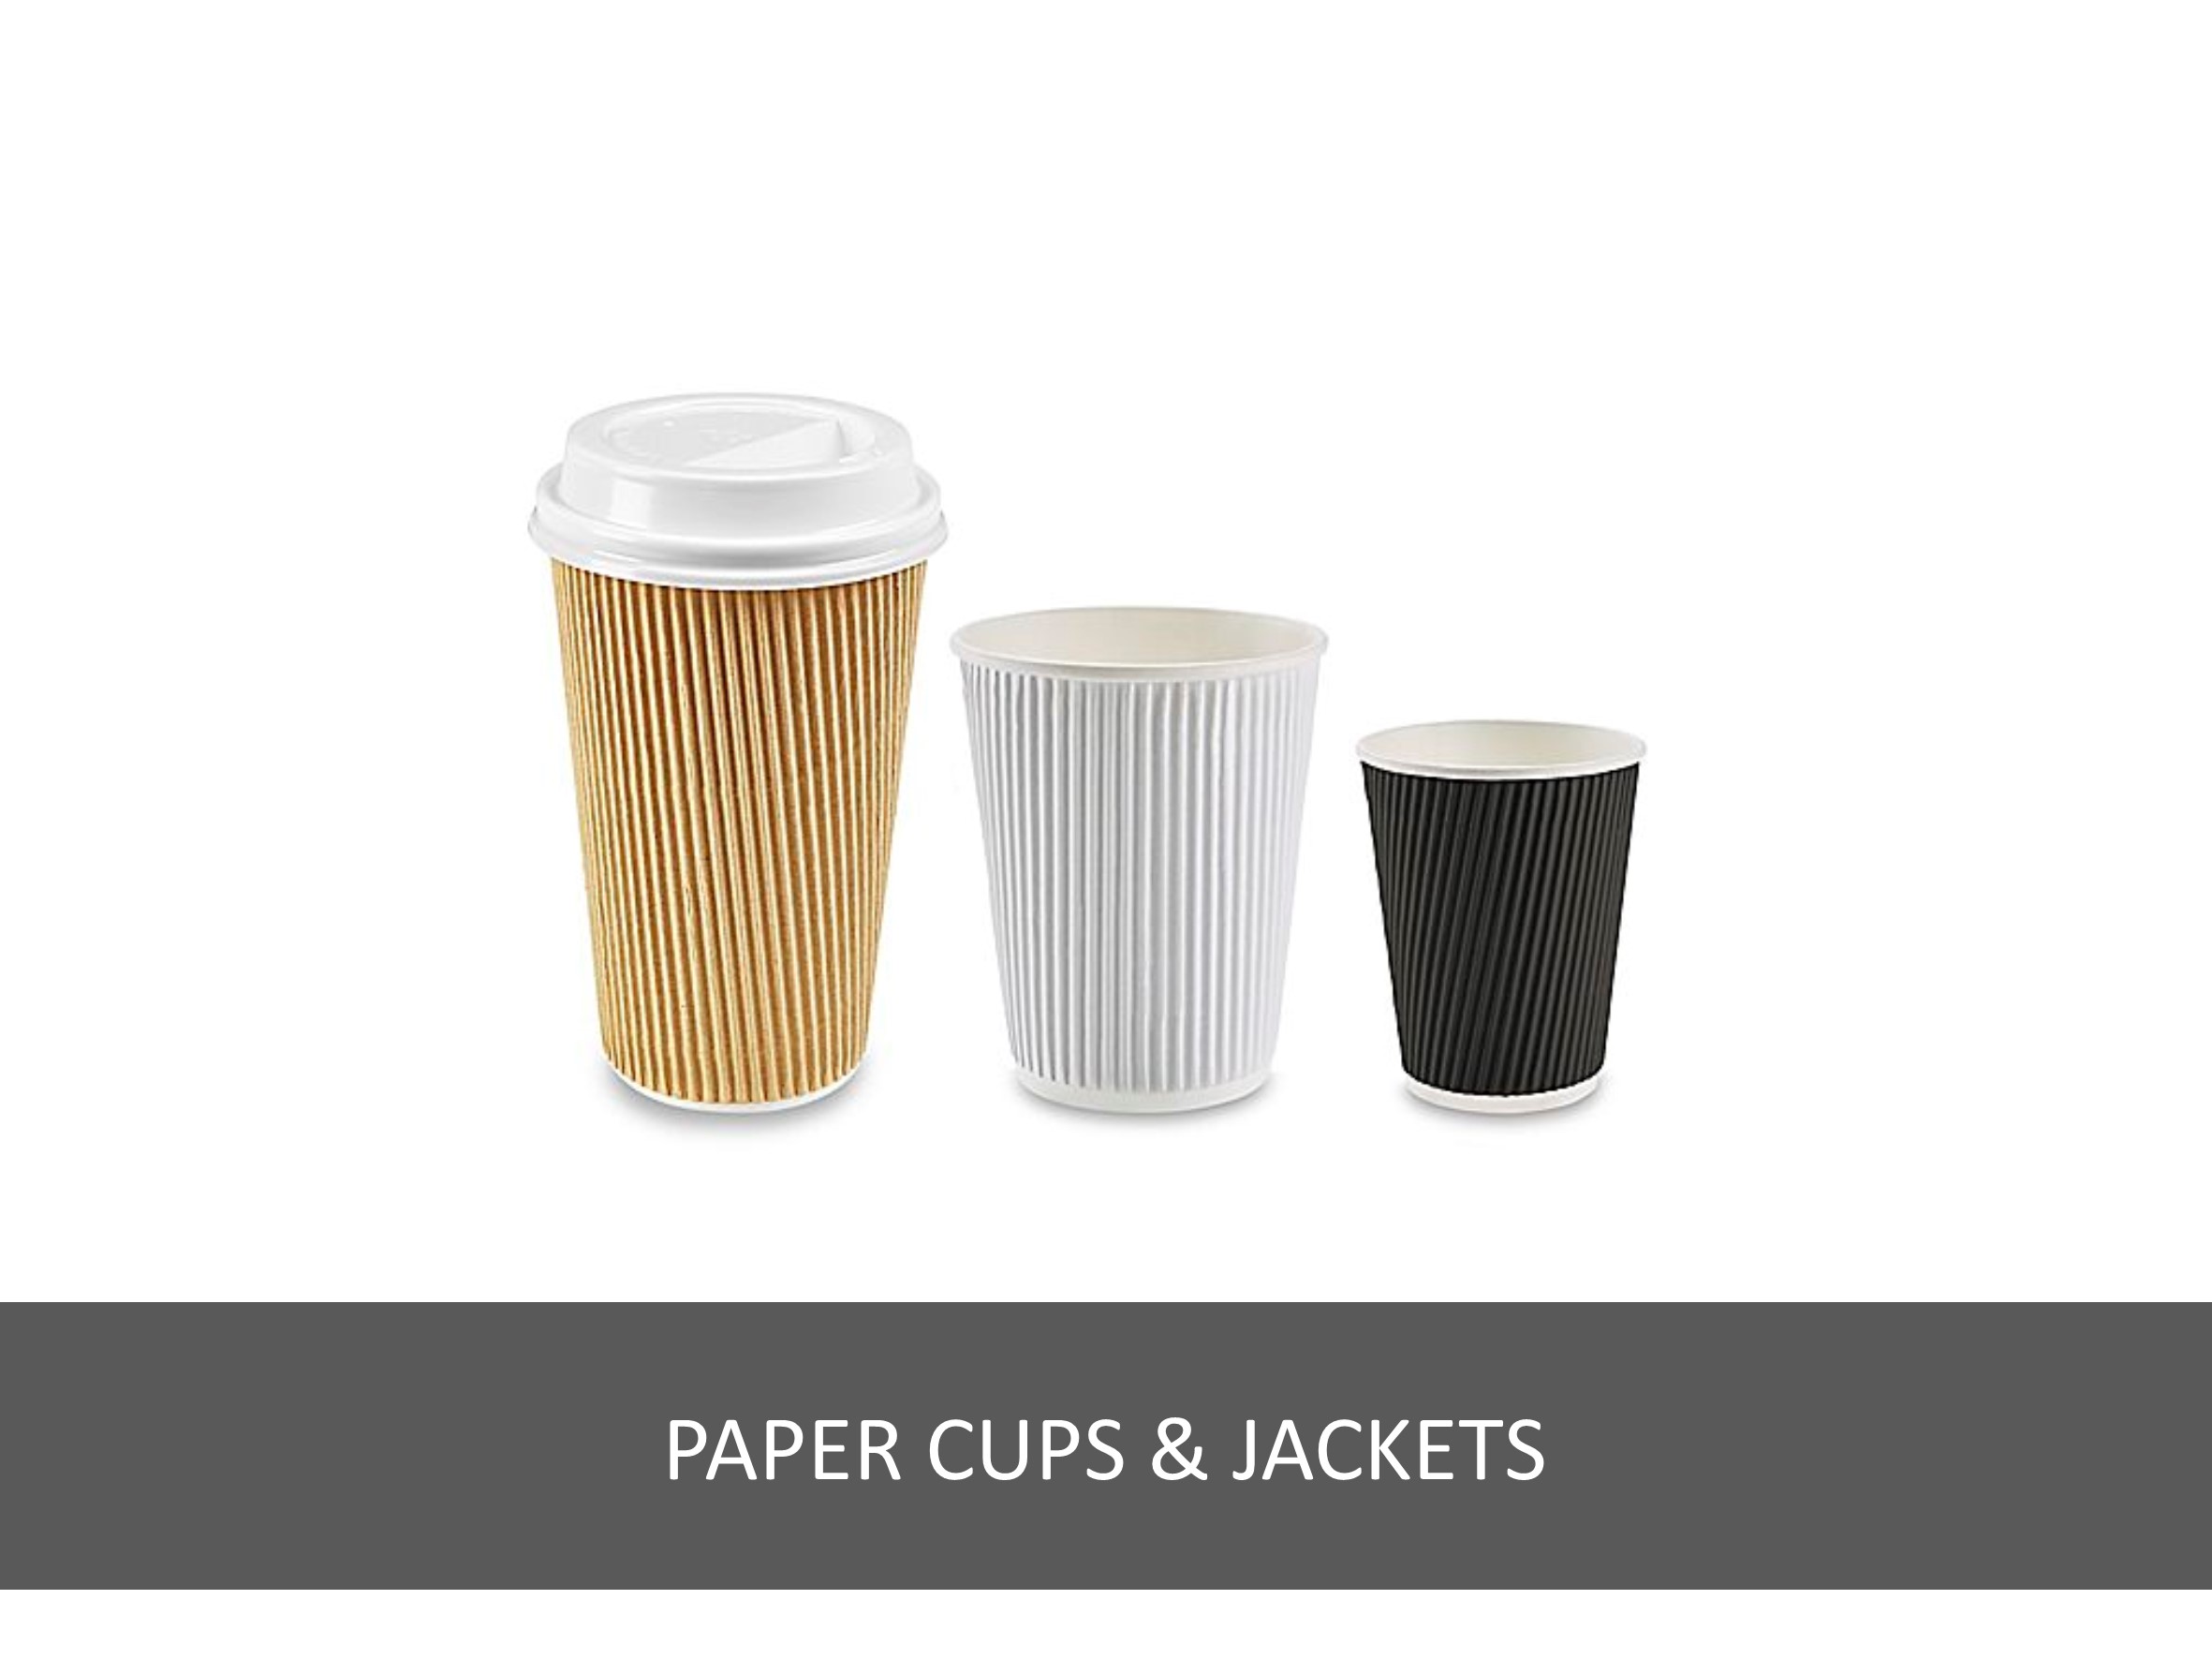 Paper cups & jackets